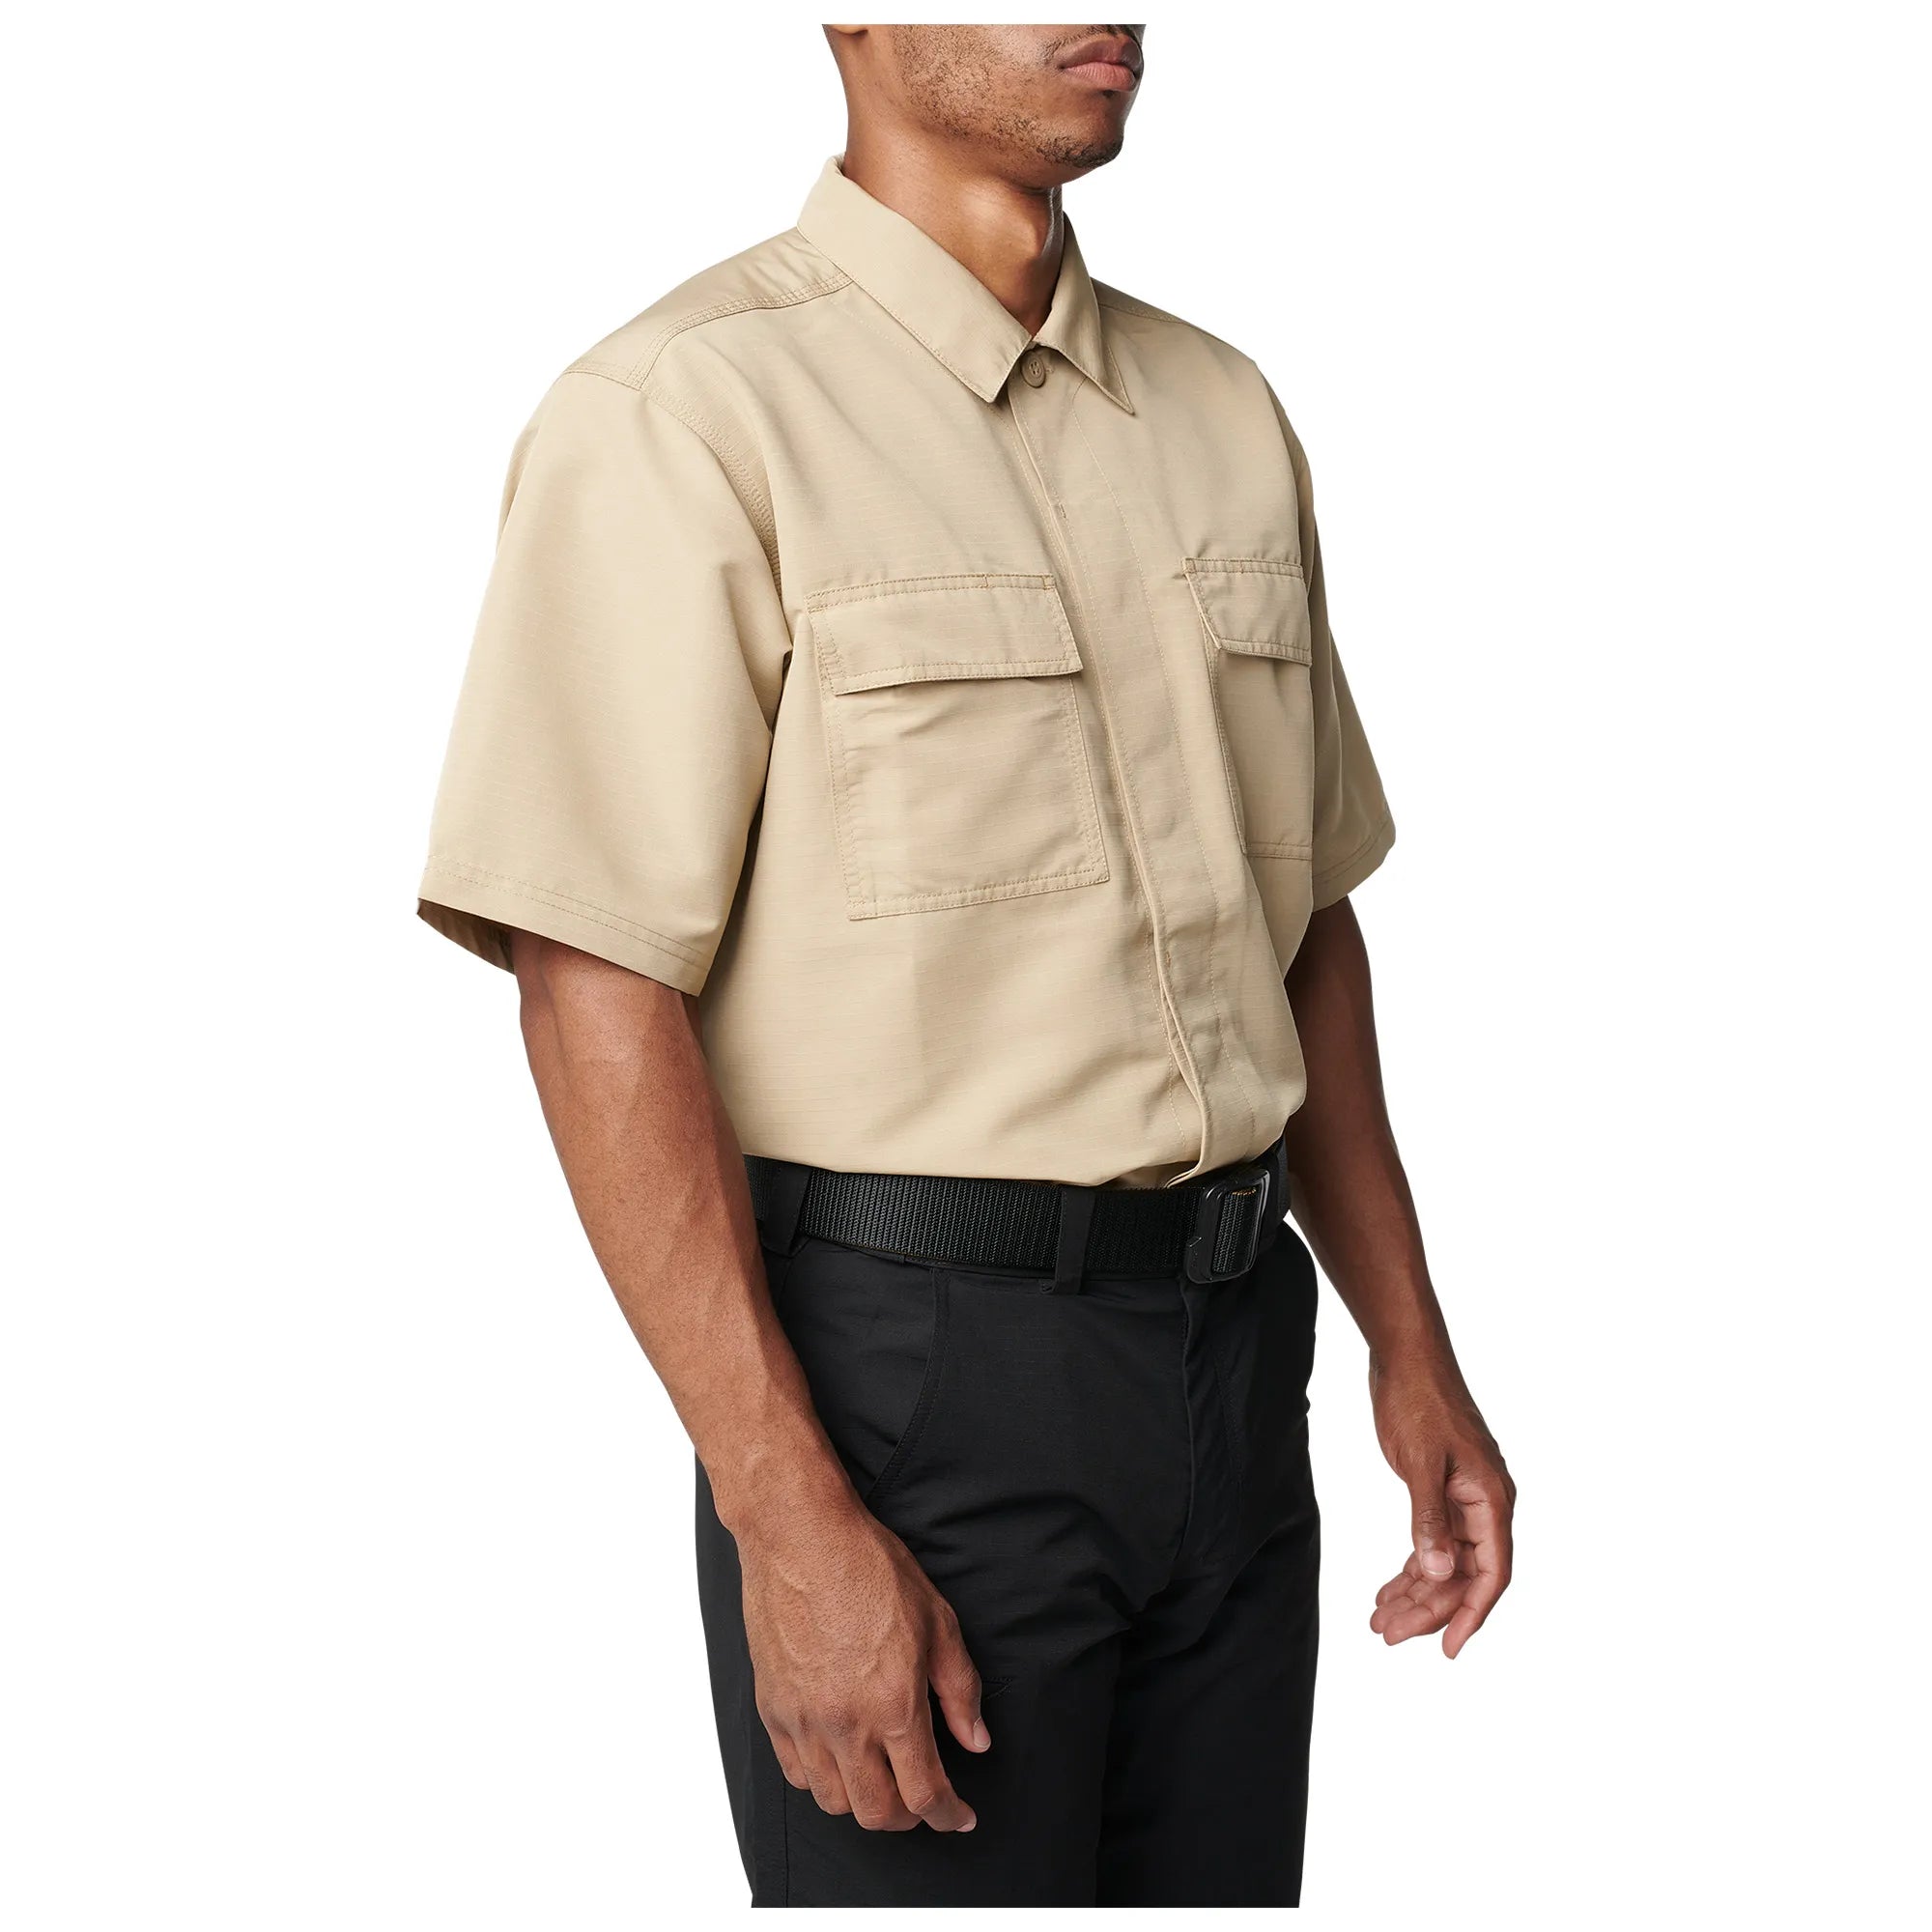 5.11 Tactical Fast-Tac TDU Short Sleeve Shirt 71379 - Clothing & Accessories